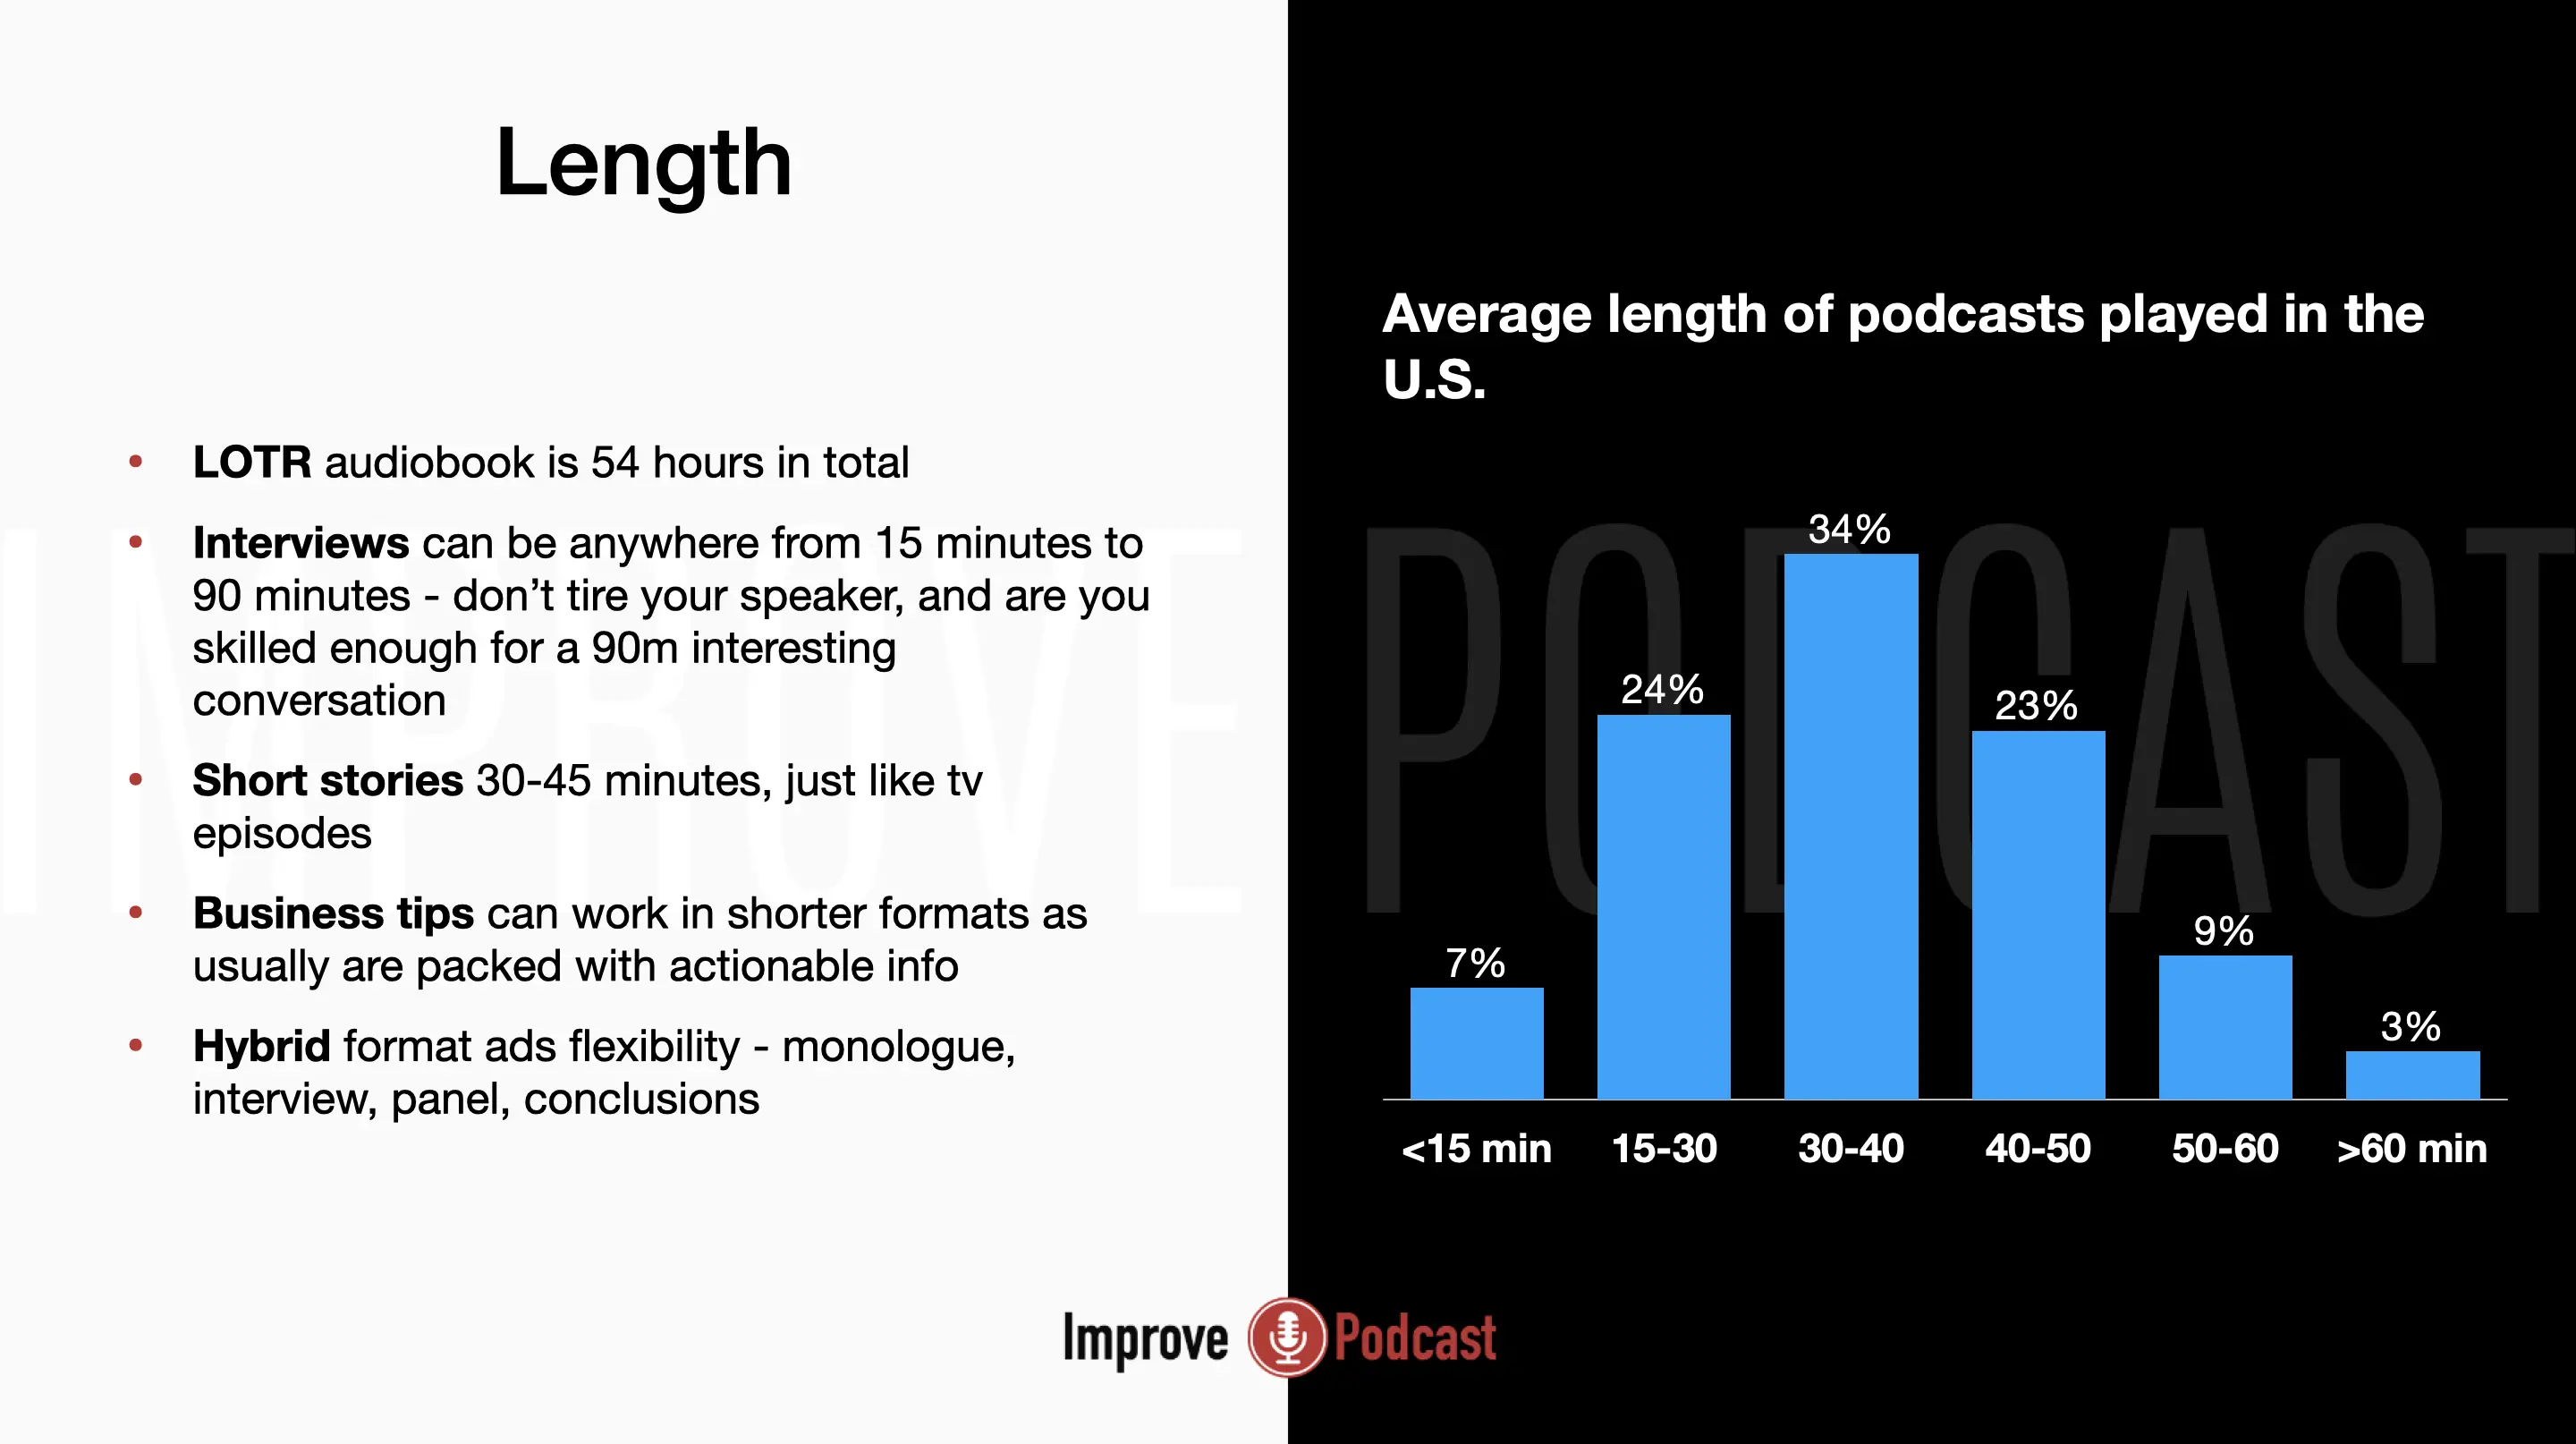 Average length of podcasts played in the U.S.